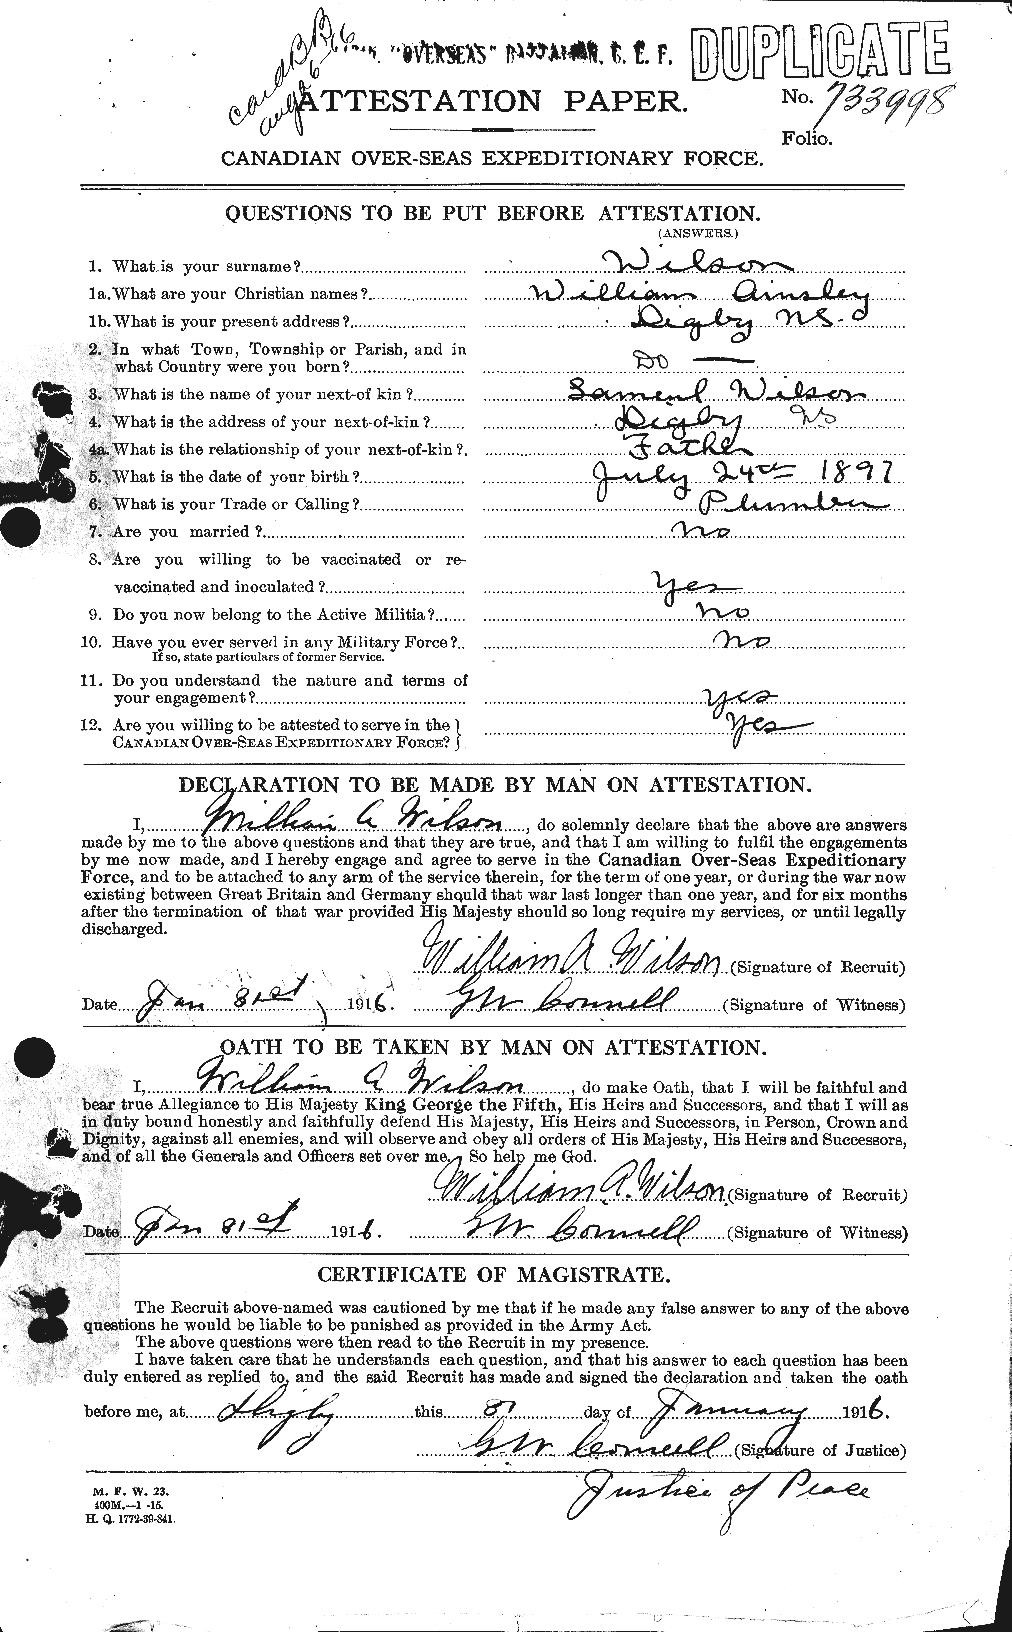 Personnel Records of the First World War - CEF 681922a